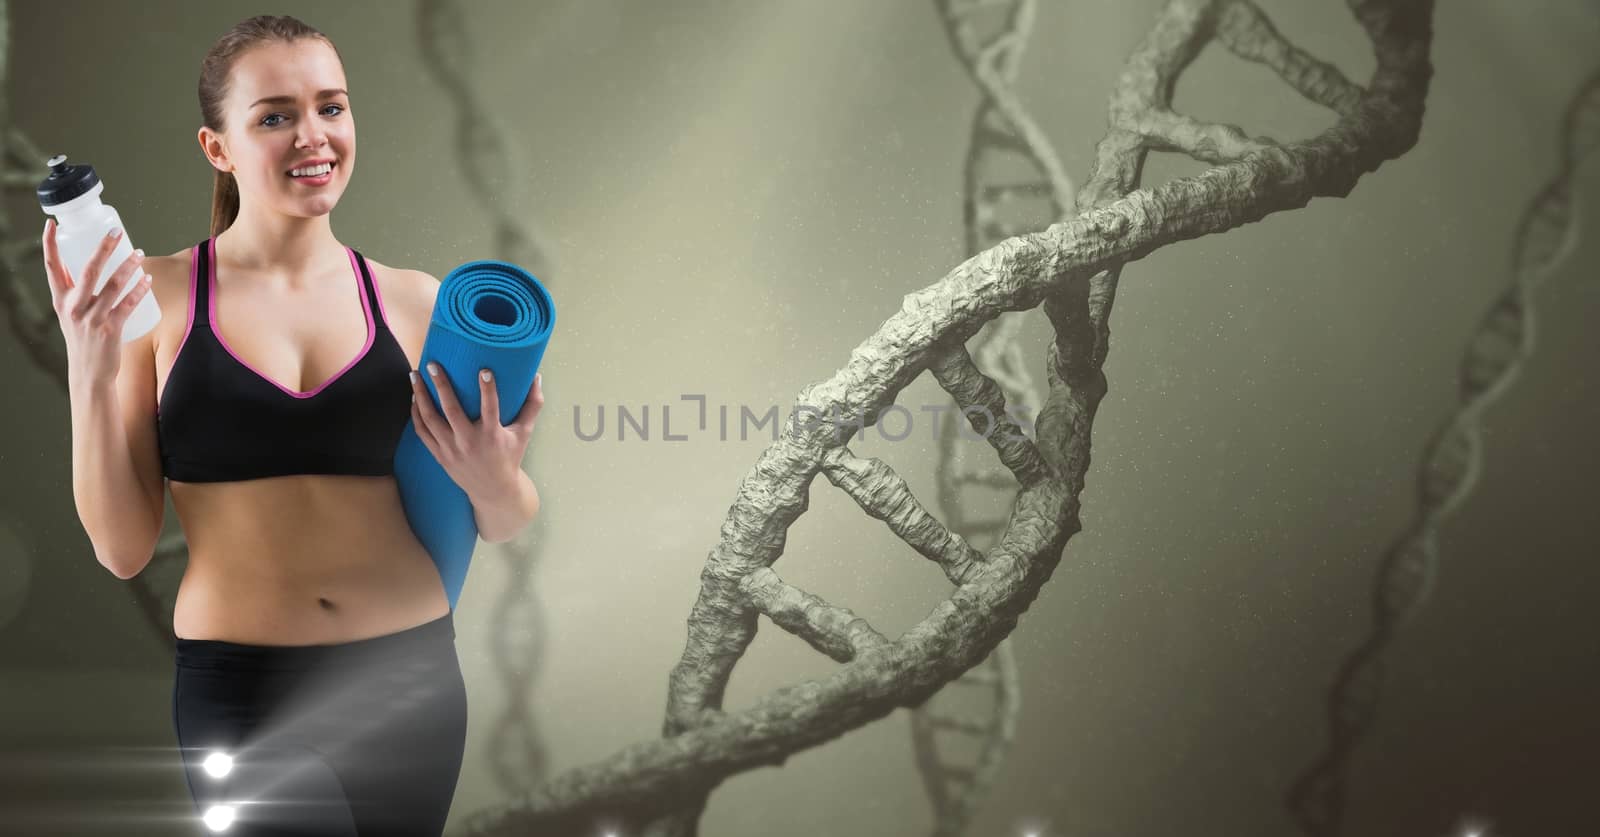 Digital composite of Woman holding yoga mat and bottle against DNA structures